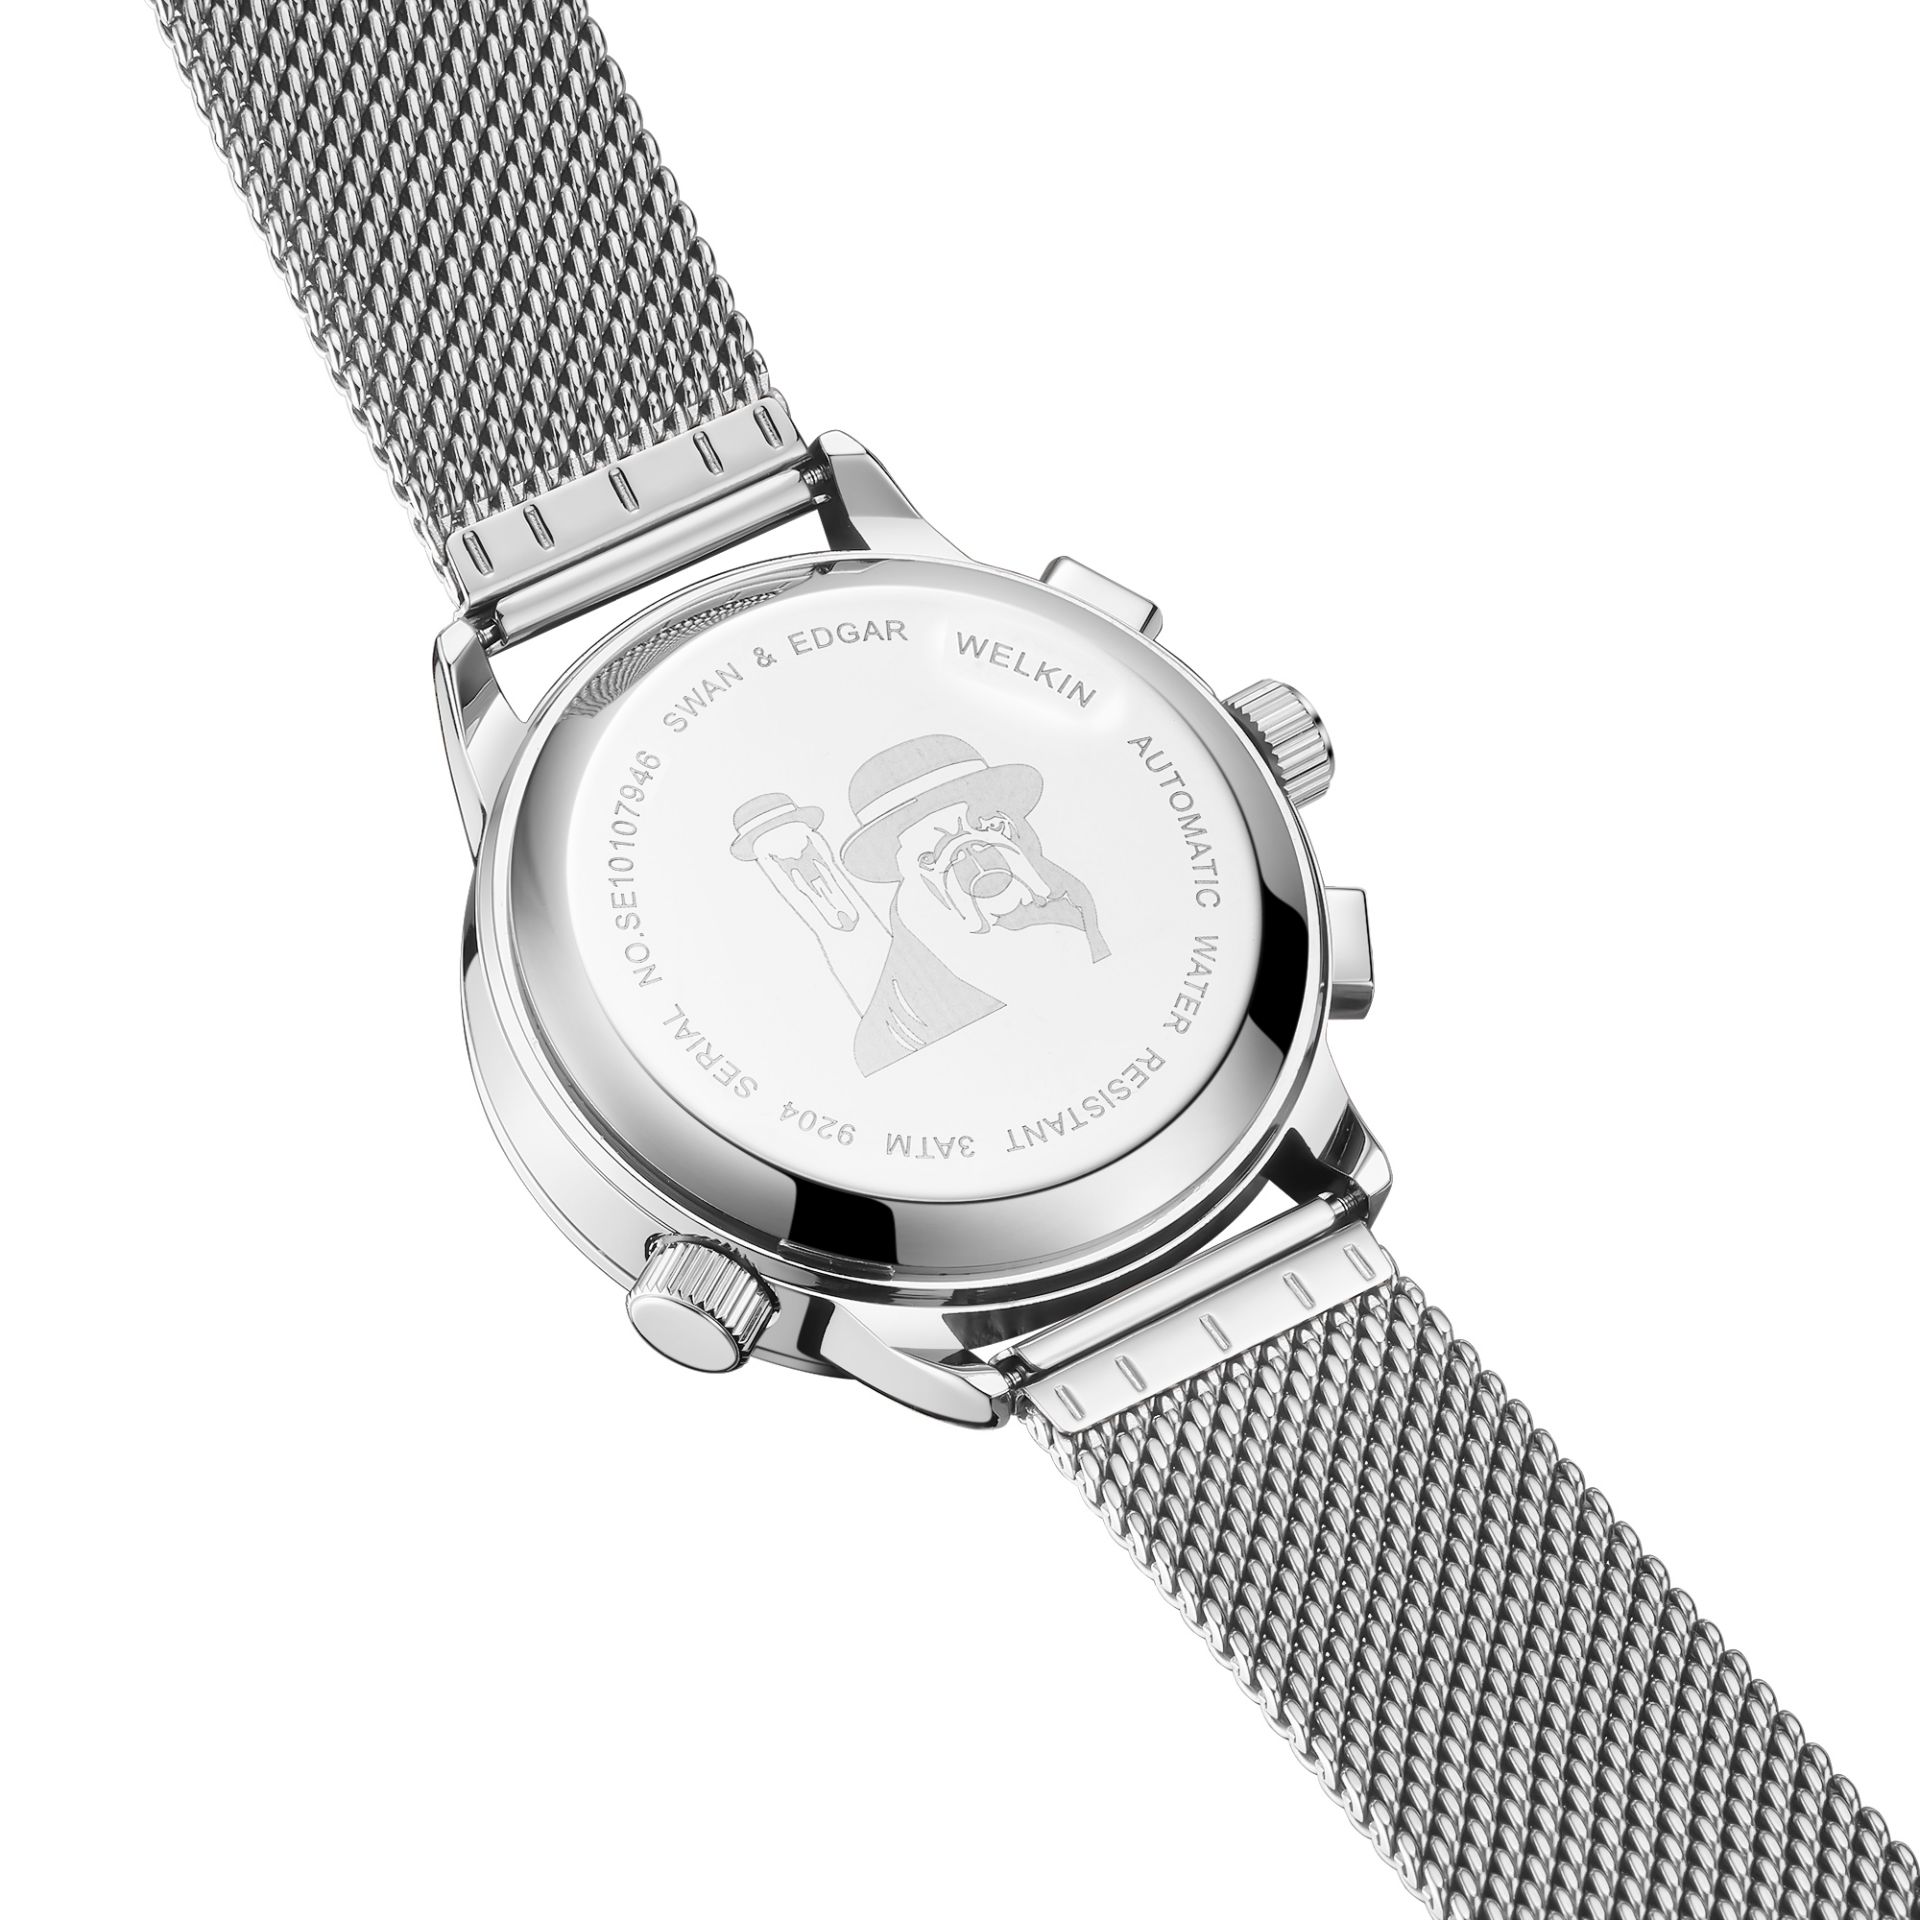 Limited Edition Swan & Edgar Welkin Automatic silver black Watch - FREE DELIVERY & 5 YEAR WARRANT... - Image 3 of 5